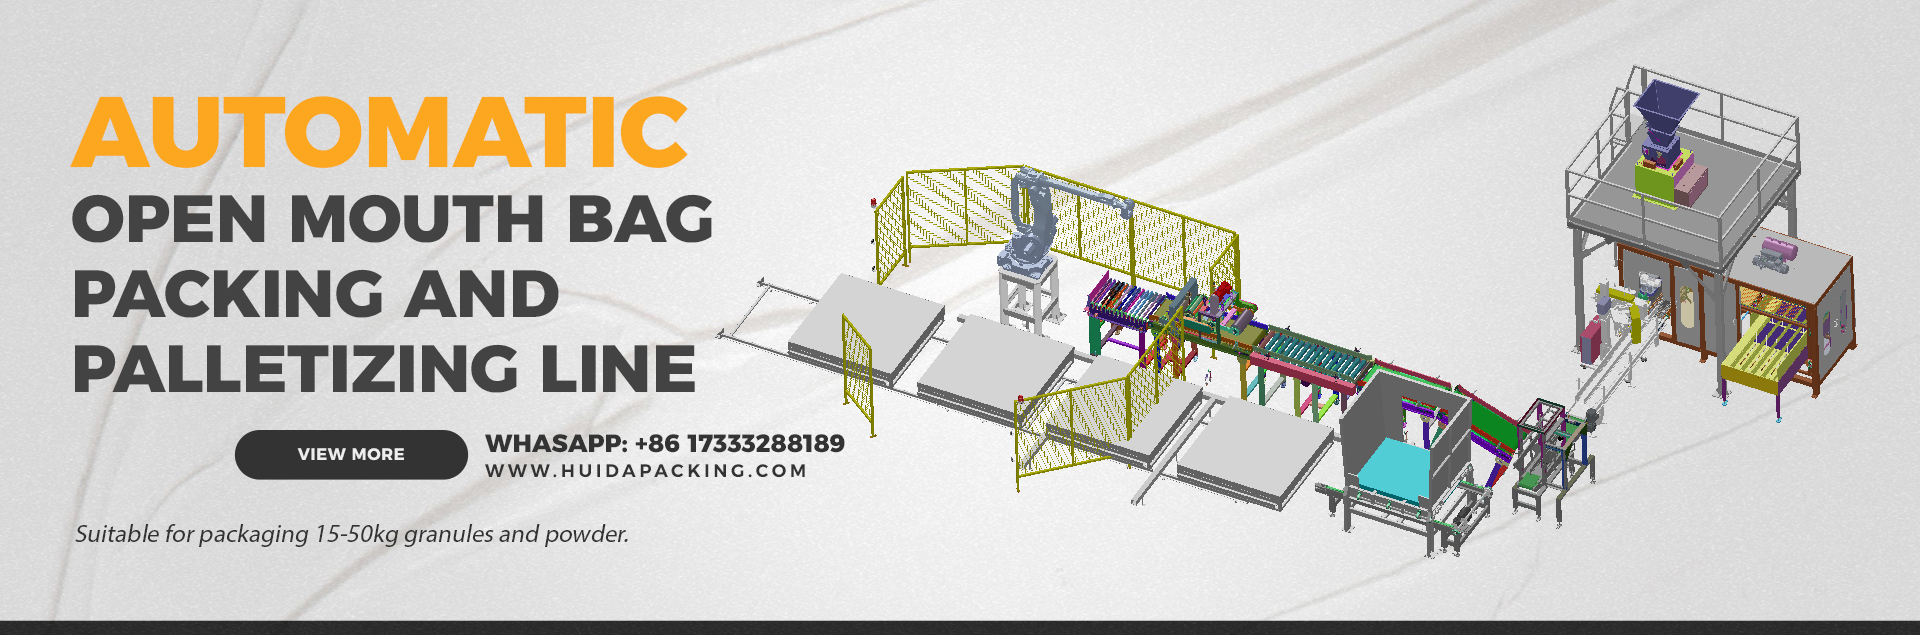 Huida Packing Automatic Open Mouth Bag Packing and Palletizing Production Line